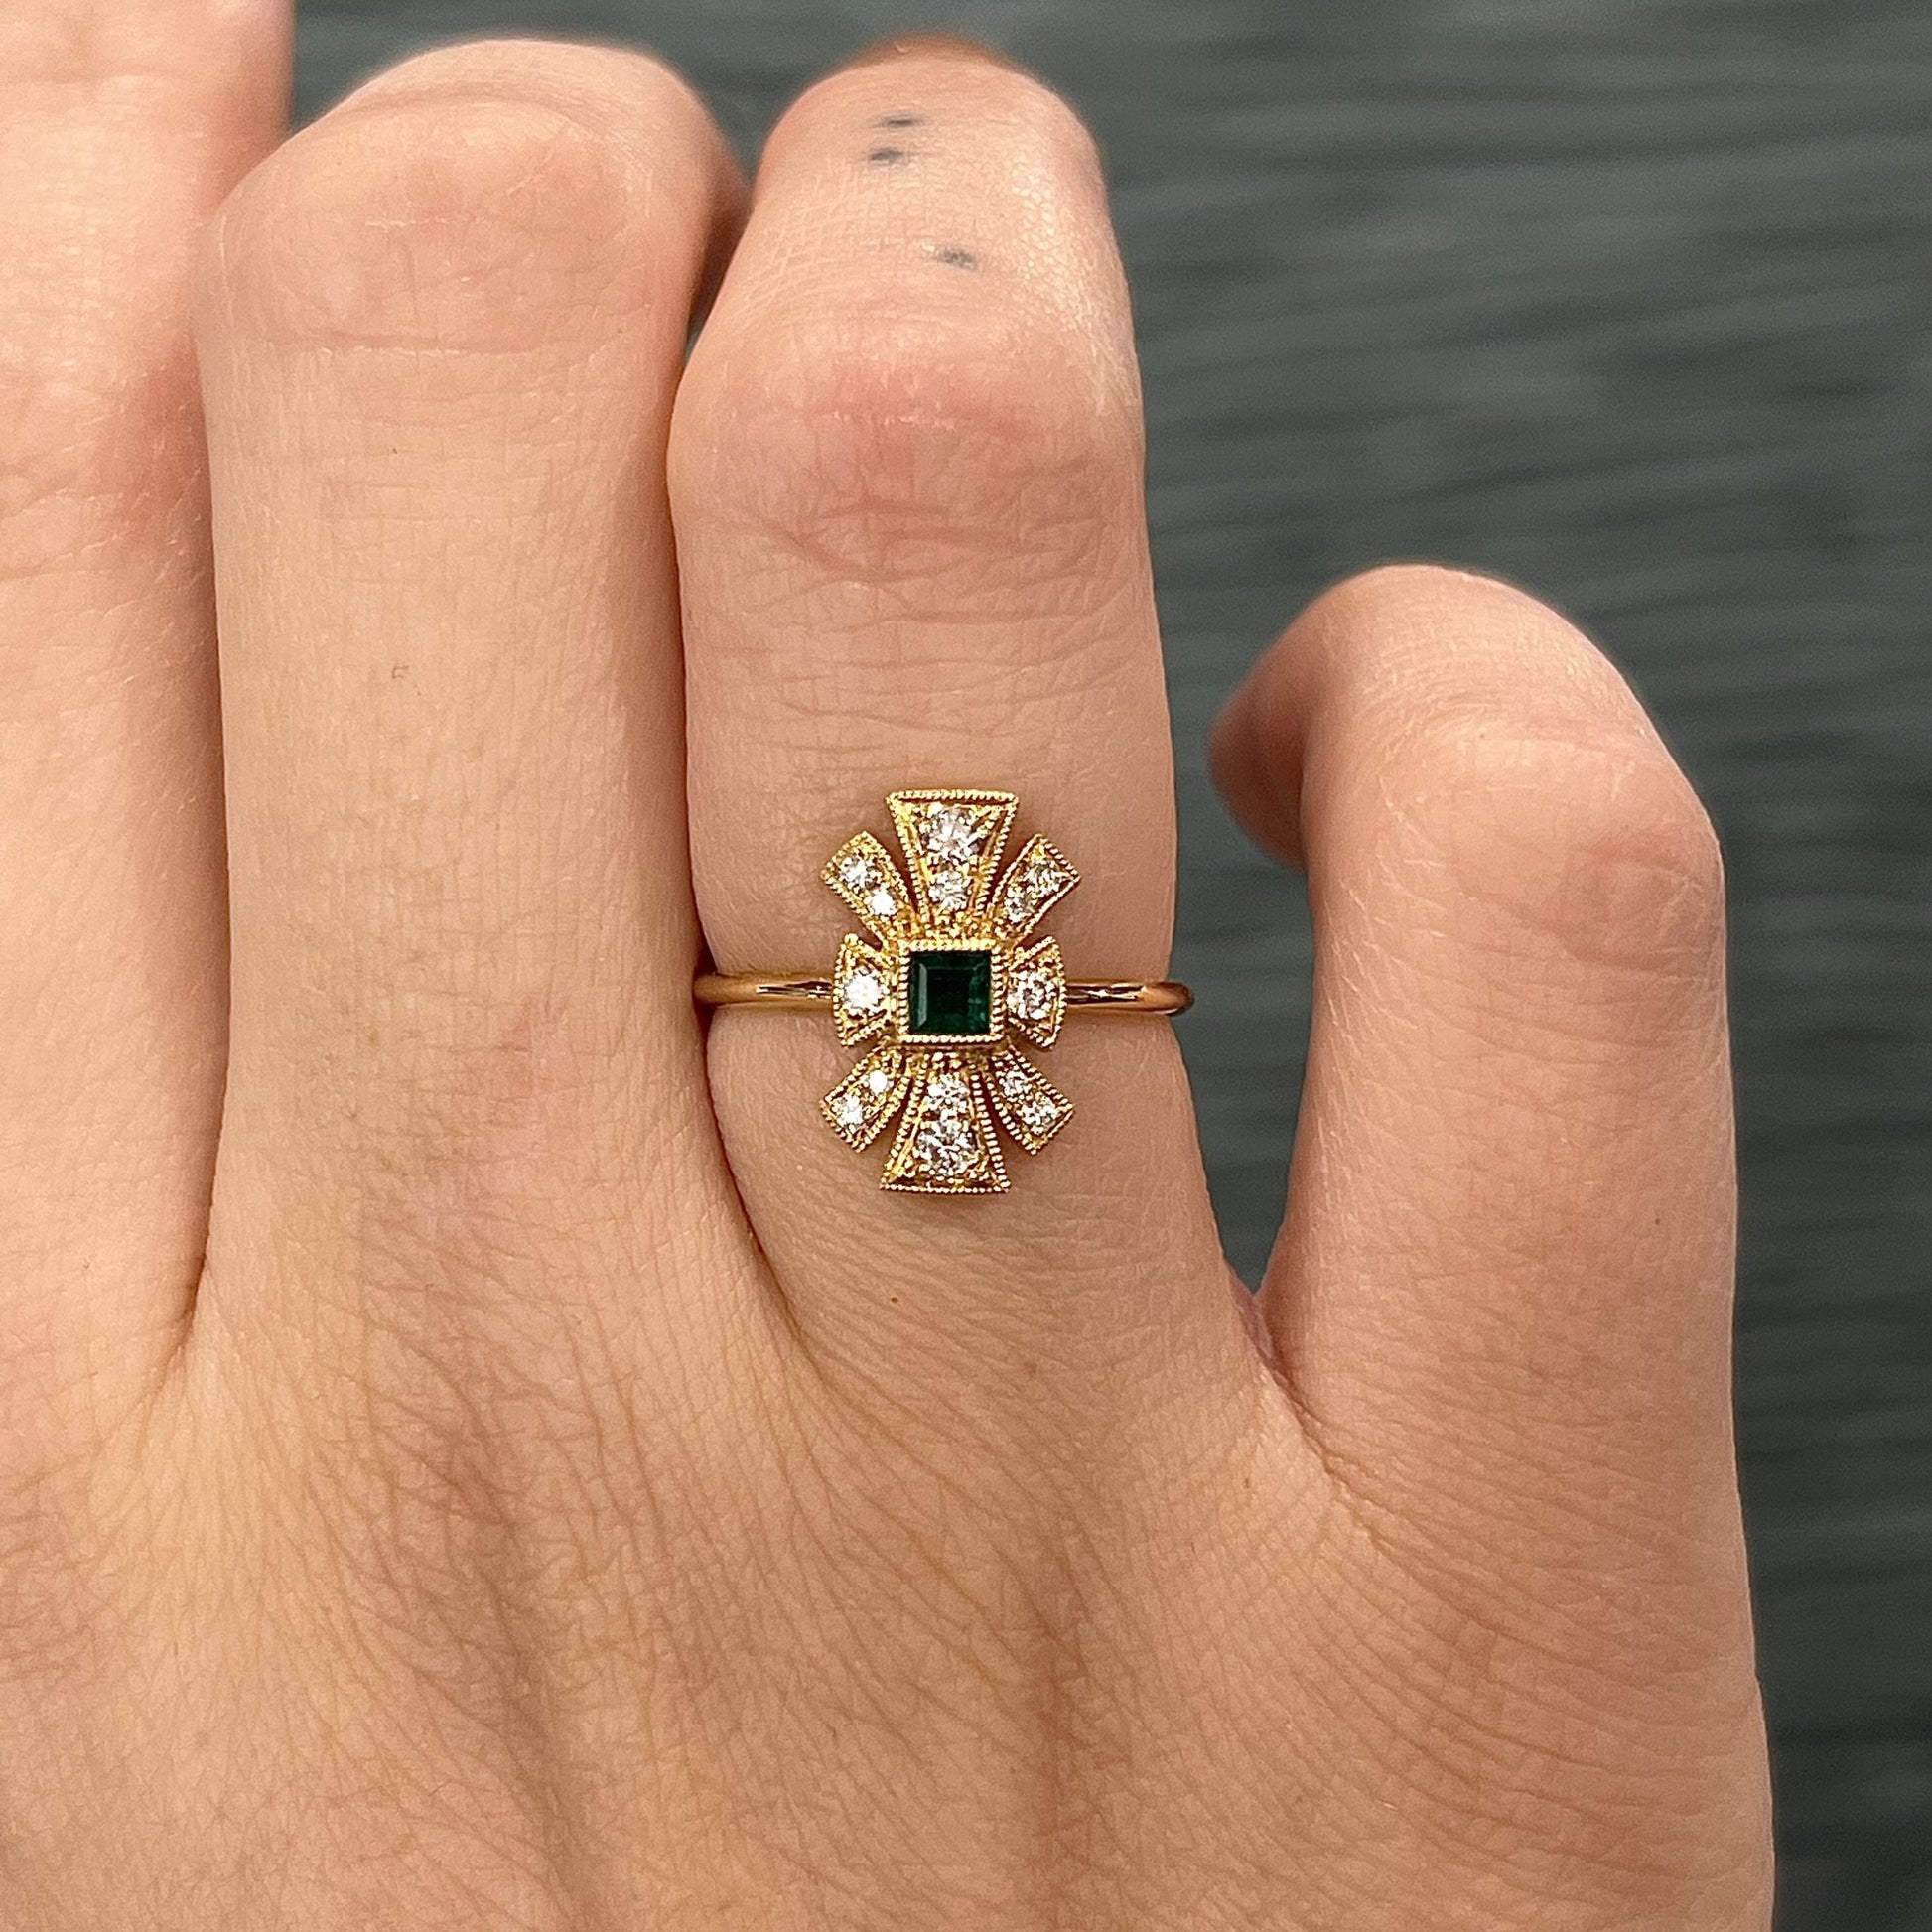 Antique Inspired Square Emerald & Diamond Cluster Ring in 18k